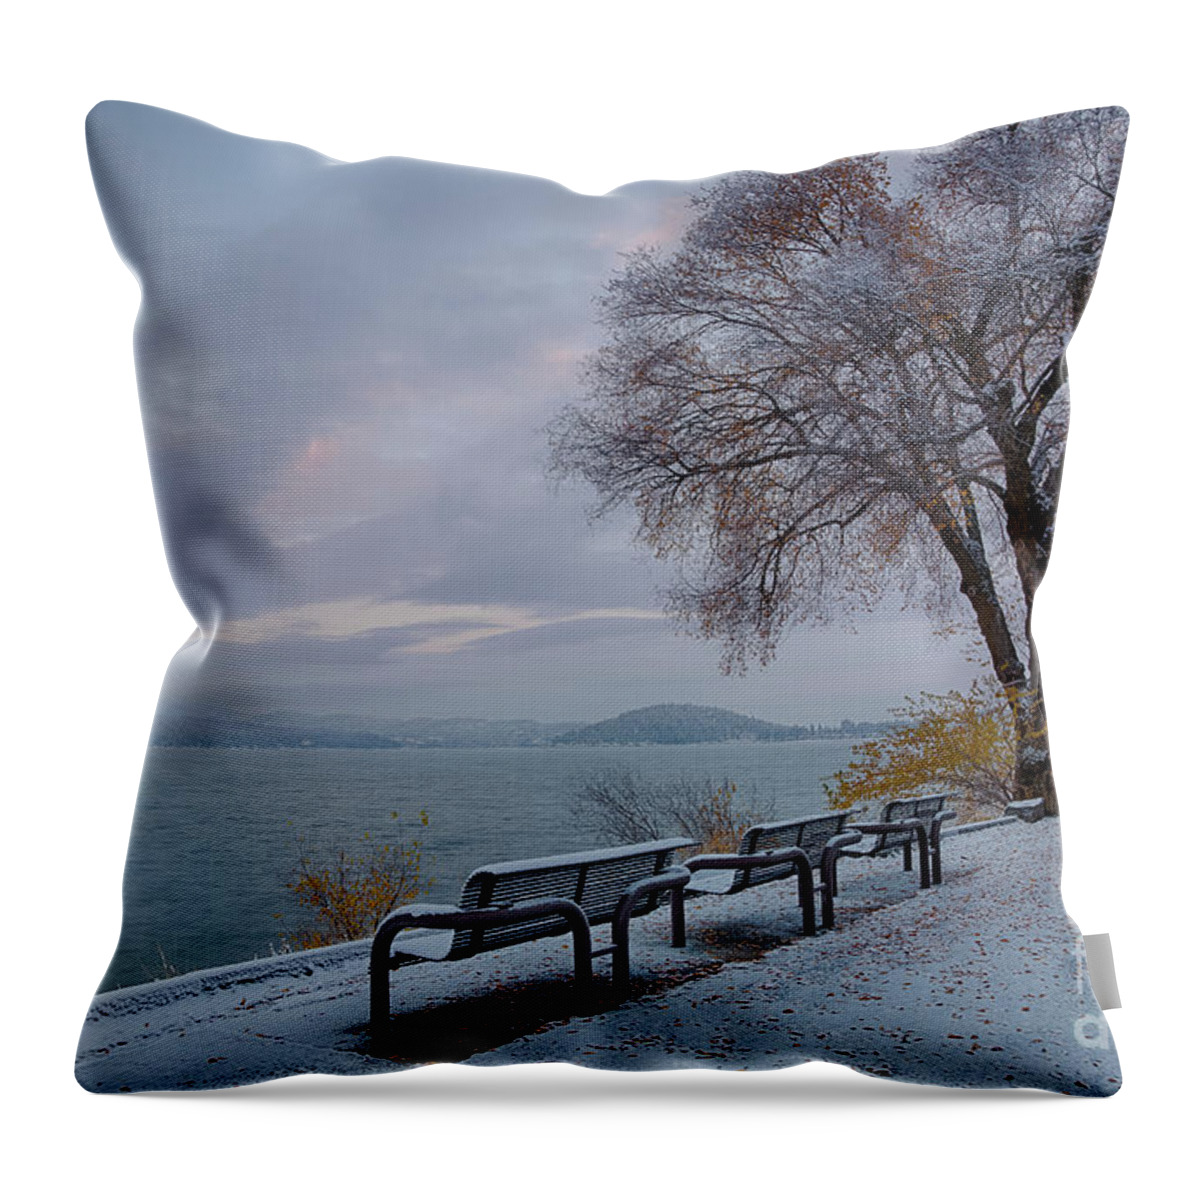 Coeur D'alene Lake Drive Throw Pillow featuring the photograph Seasons Change #1 by Idaho Scenic Images Linda Lantzy